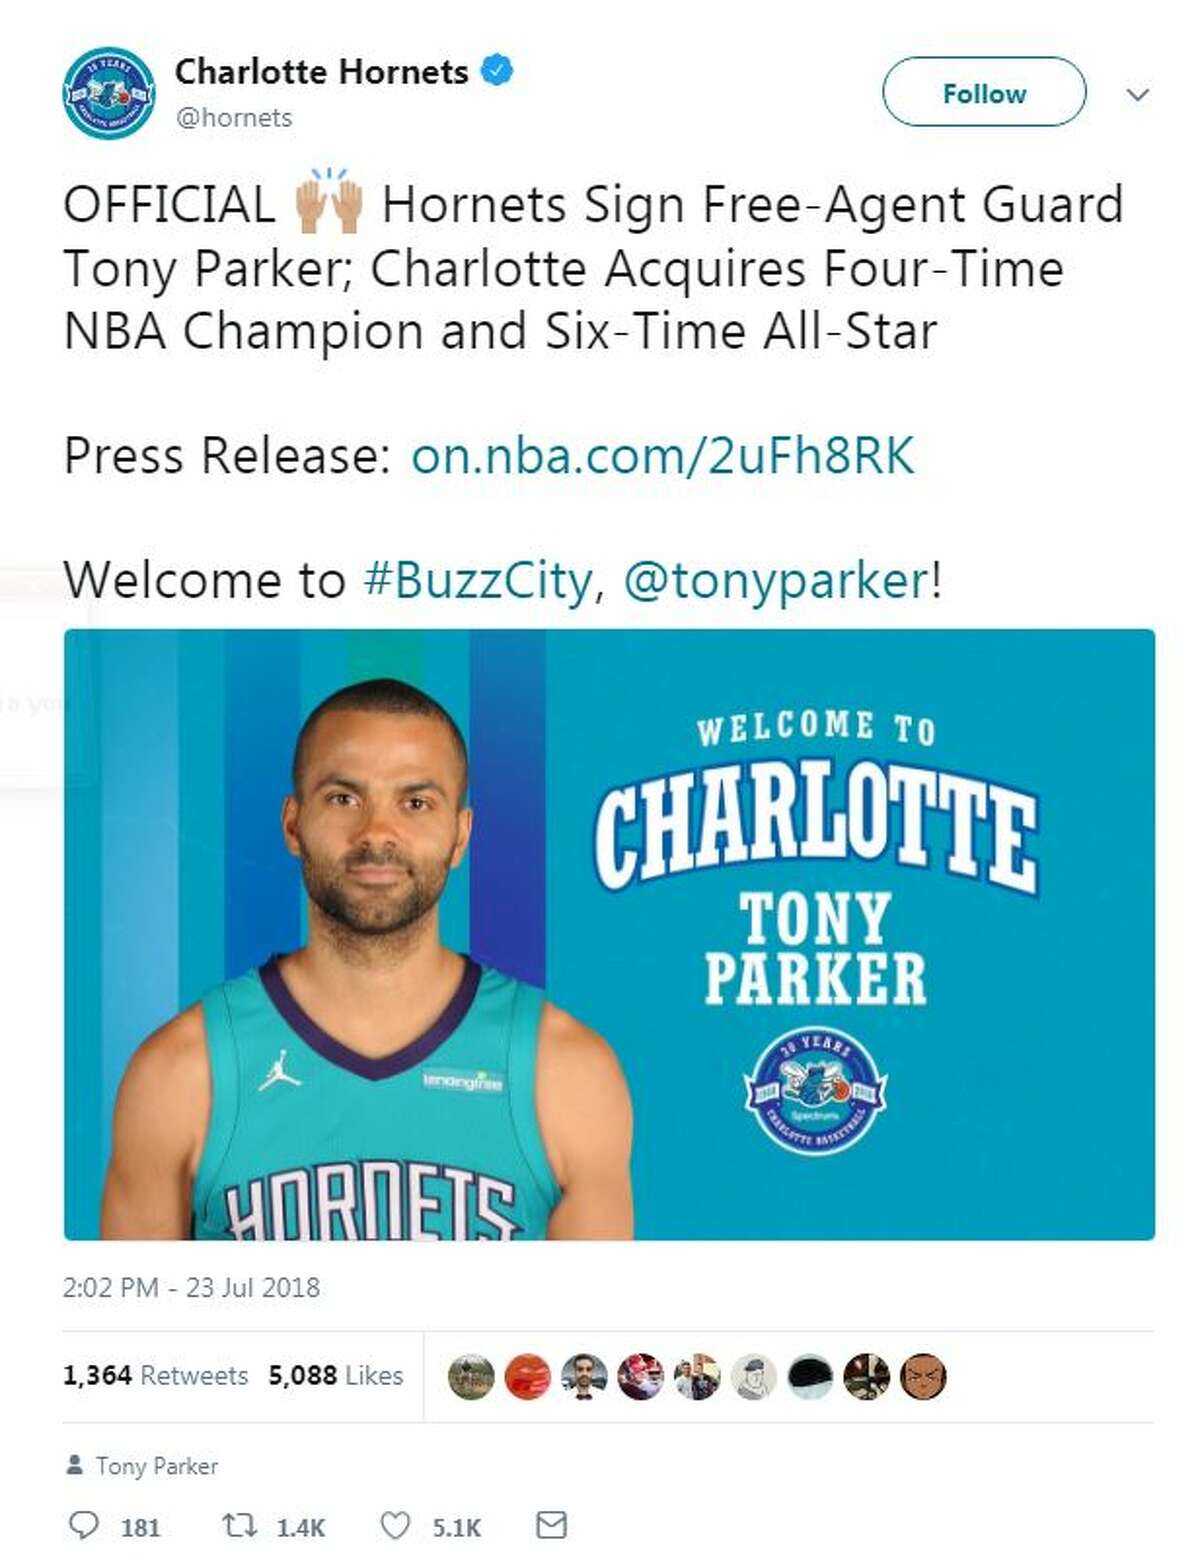 The Charlotte Hornets officially signed Tony Parker, who played for 17 seasons with the San Antonio Spurs.